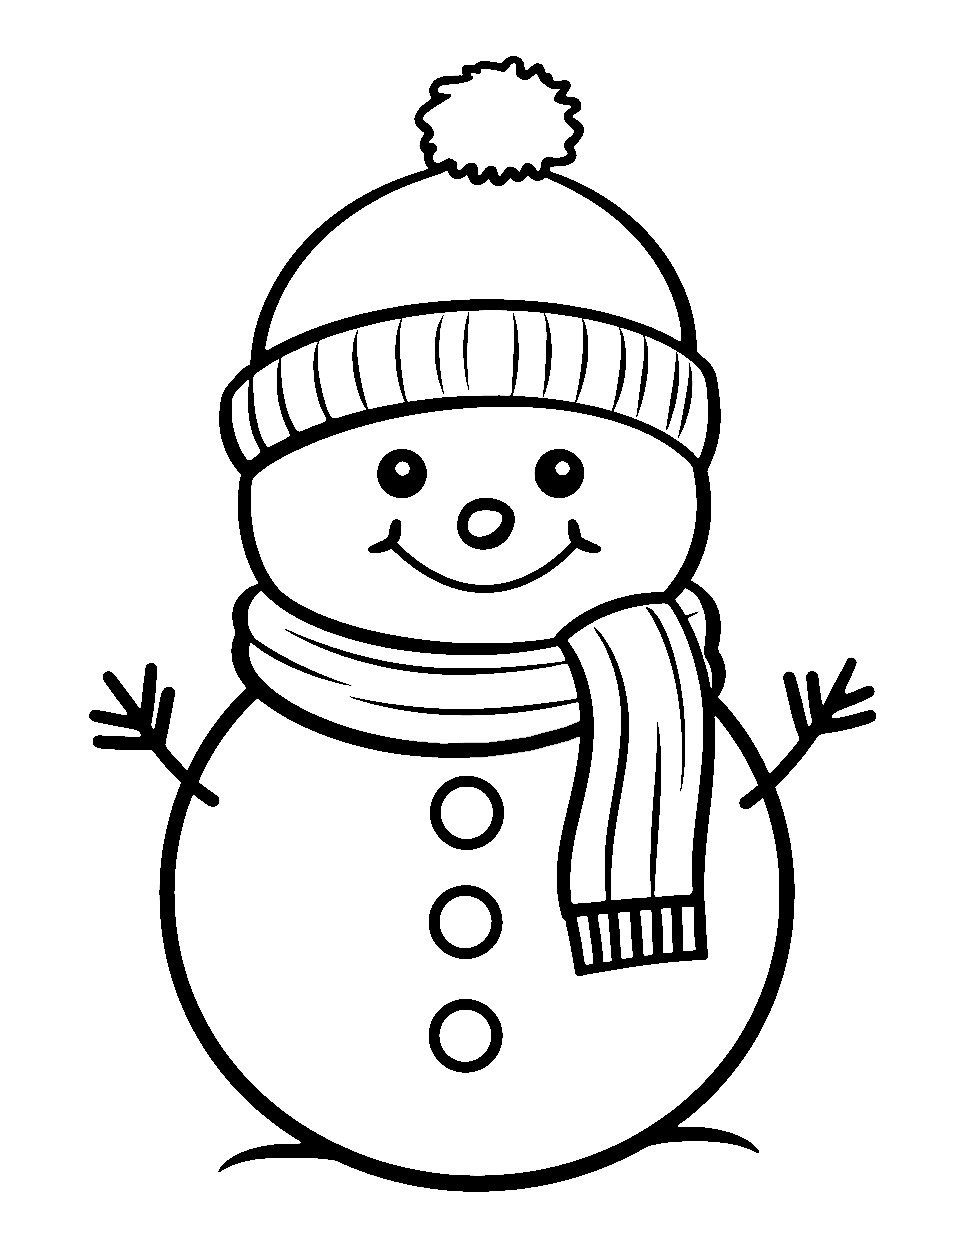 Preschool Snowman Coloring Page - A small, simple snowman suitable for a young preschool child to color.